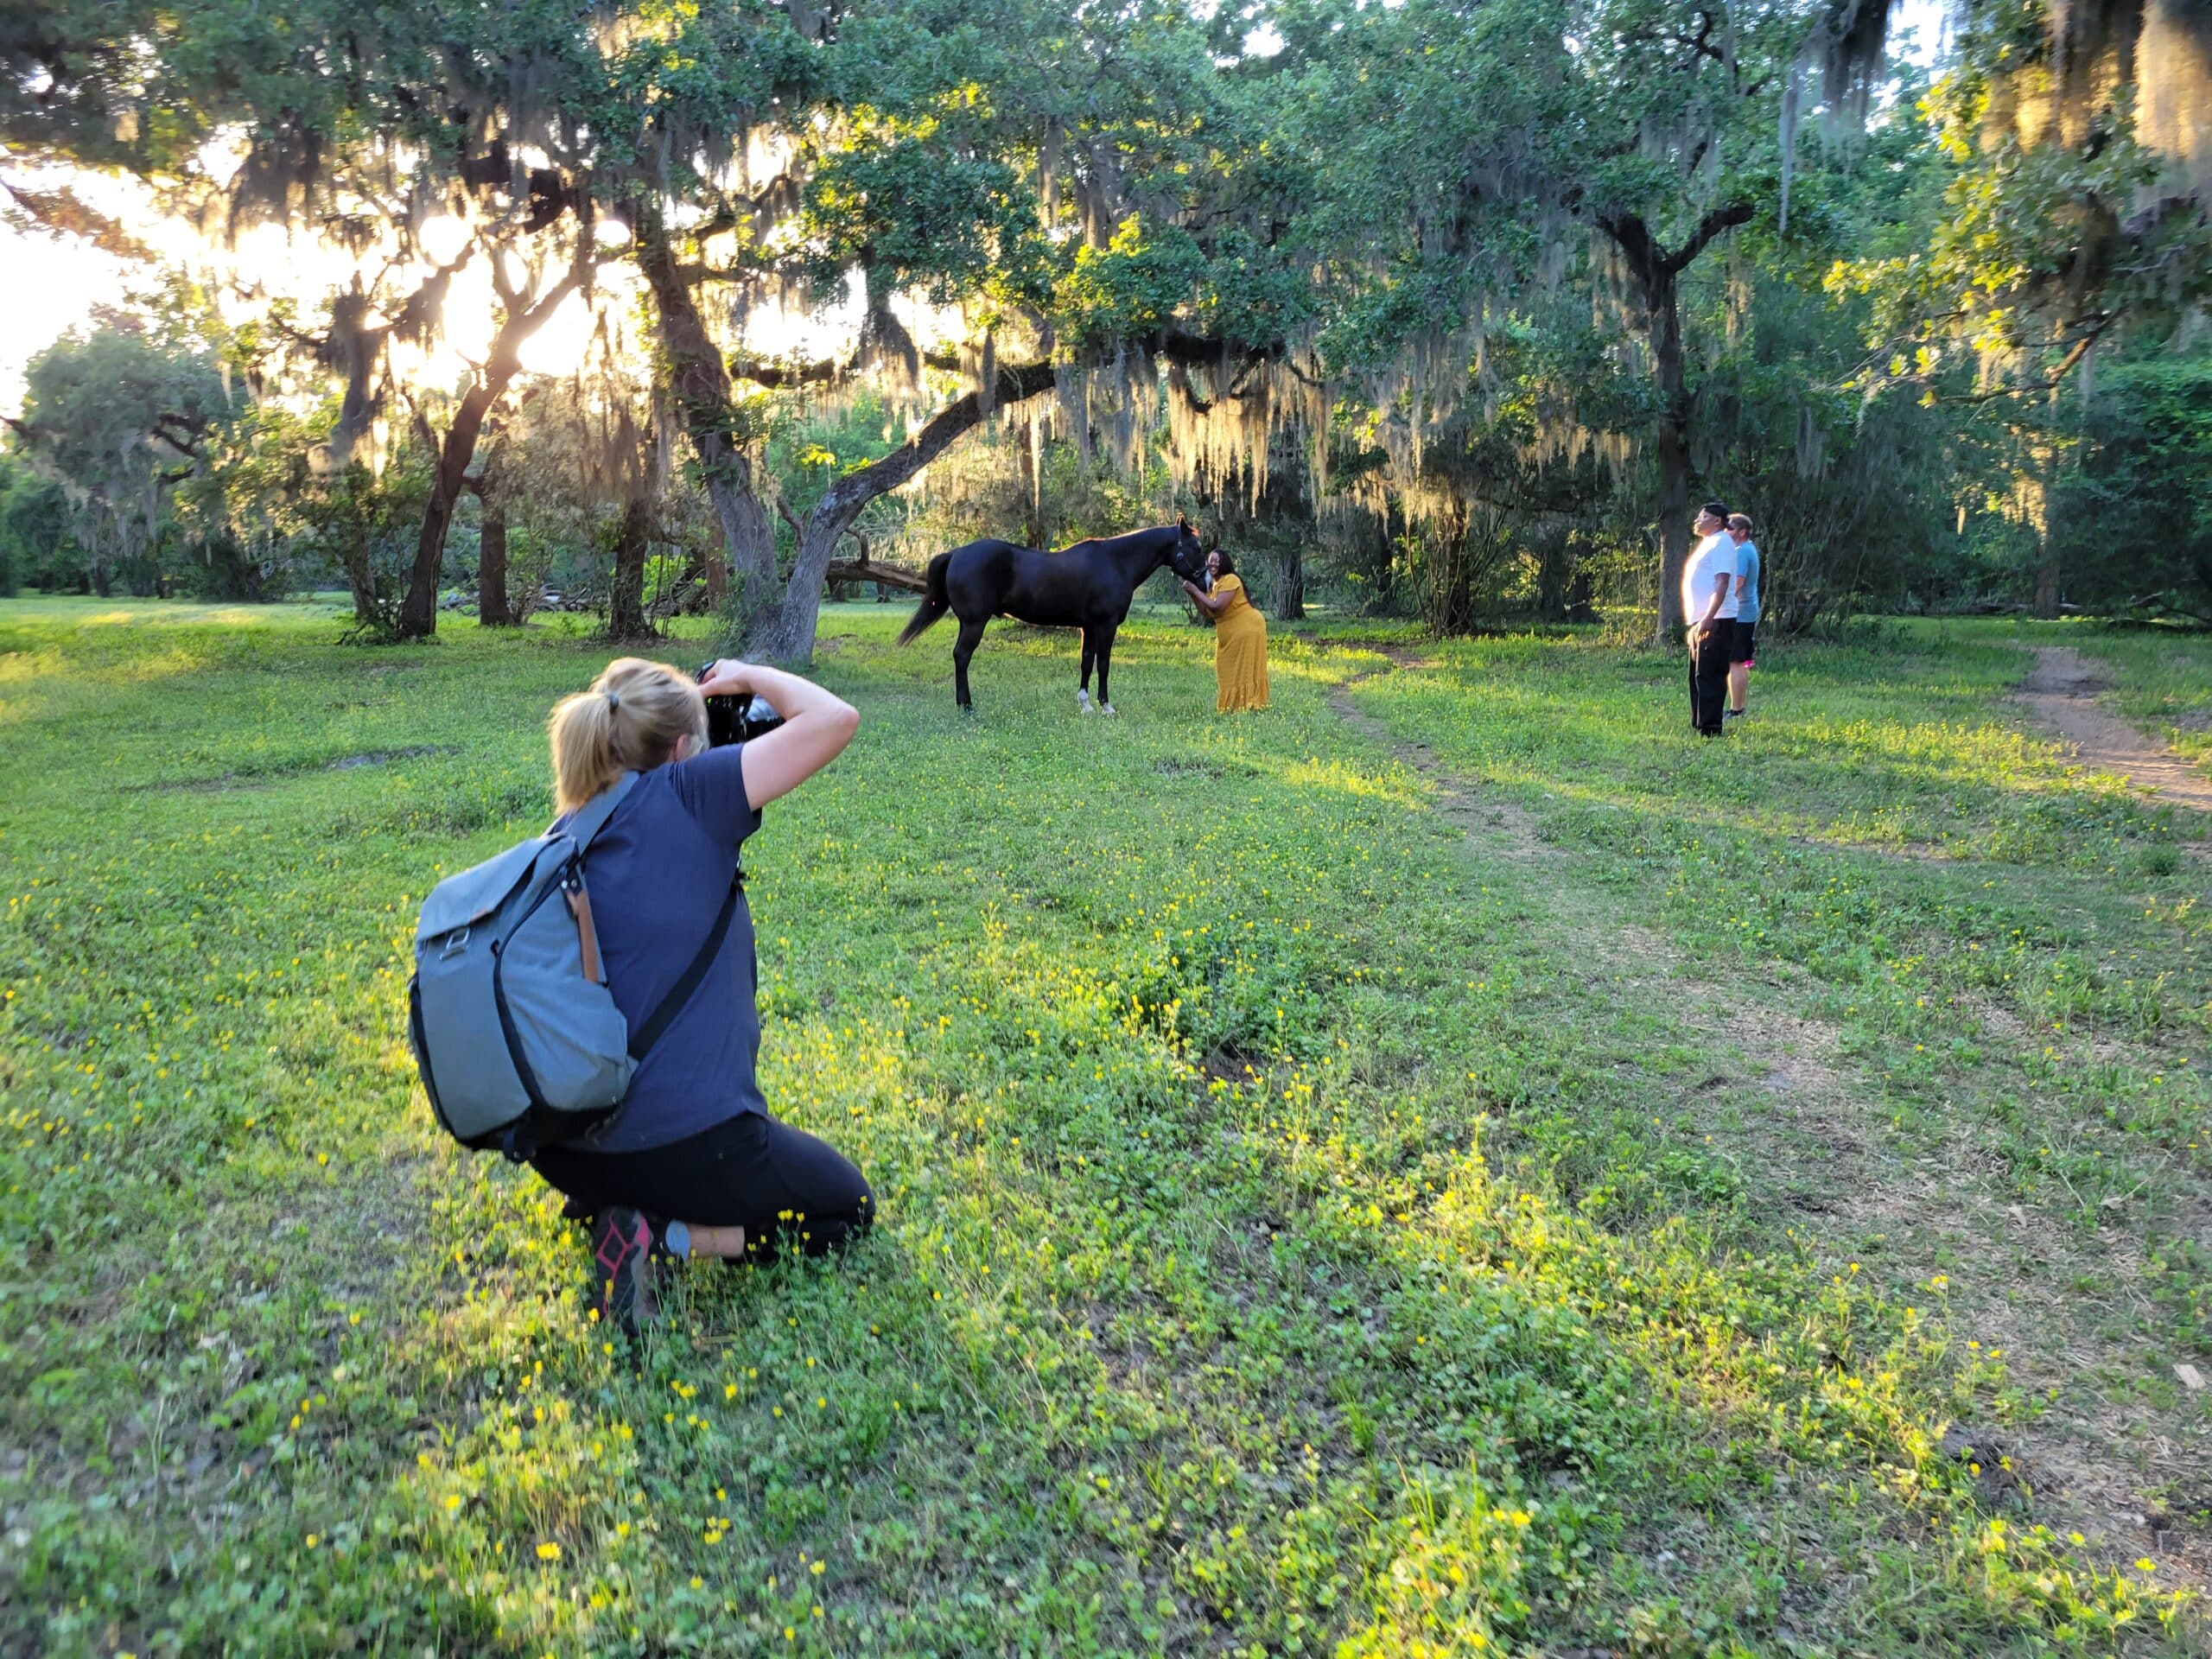 Kelly J. Russo Photography. A behind the scenes shot of Kelly on an equine photoshoot. The photo is taken from behind as she is crouched on the floor to get an angled shot of a horse in the distance.